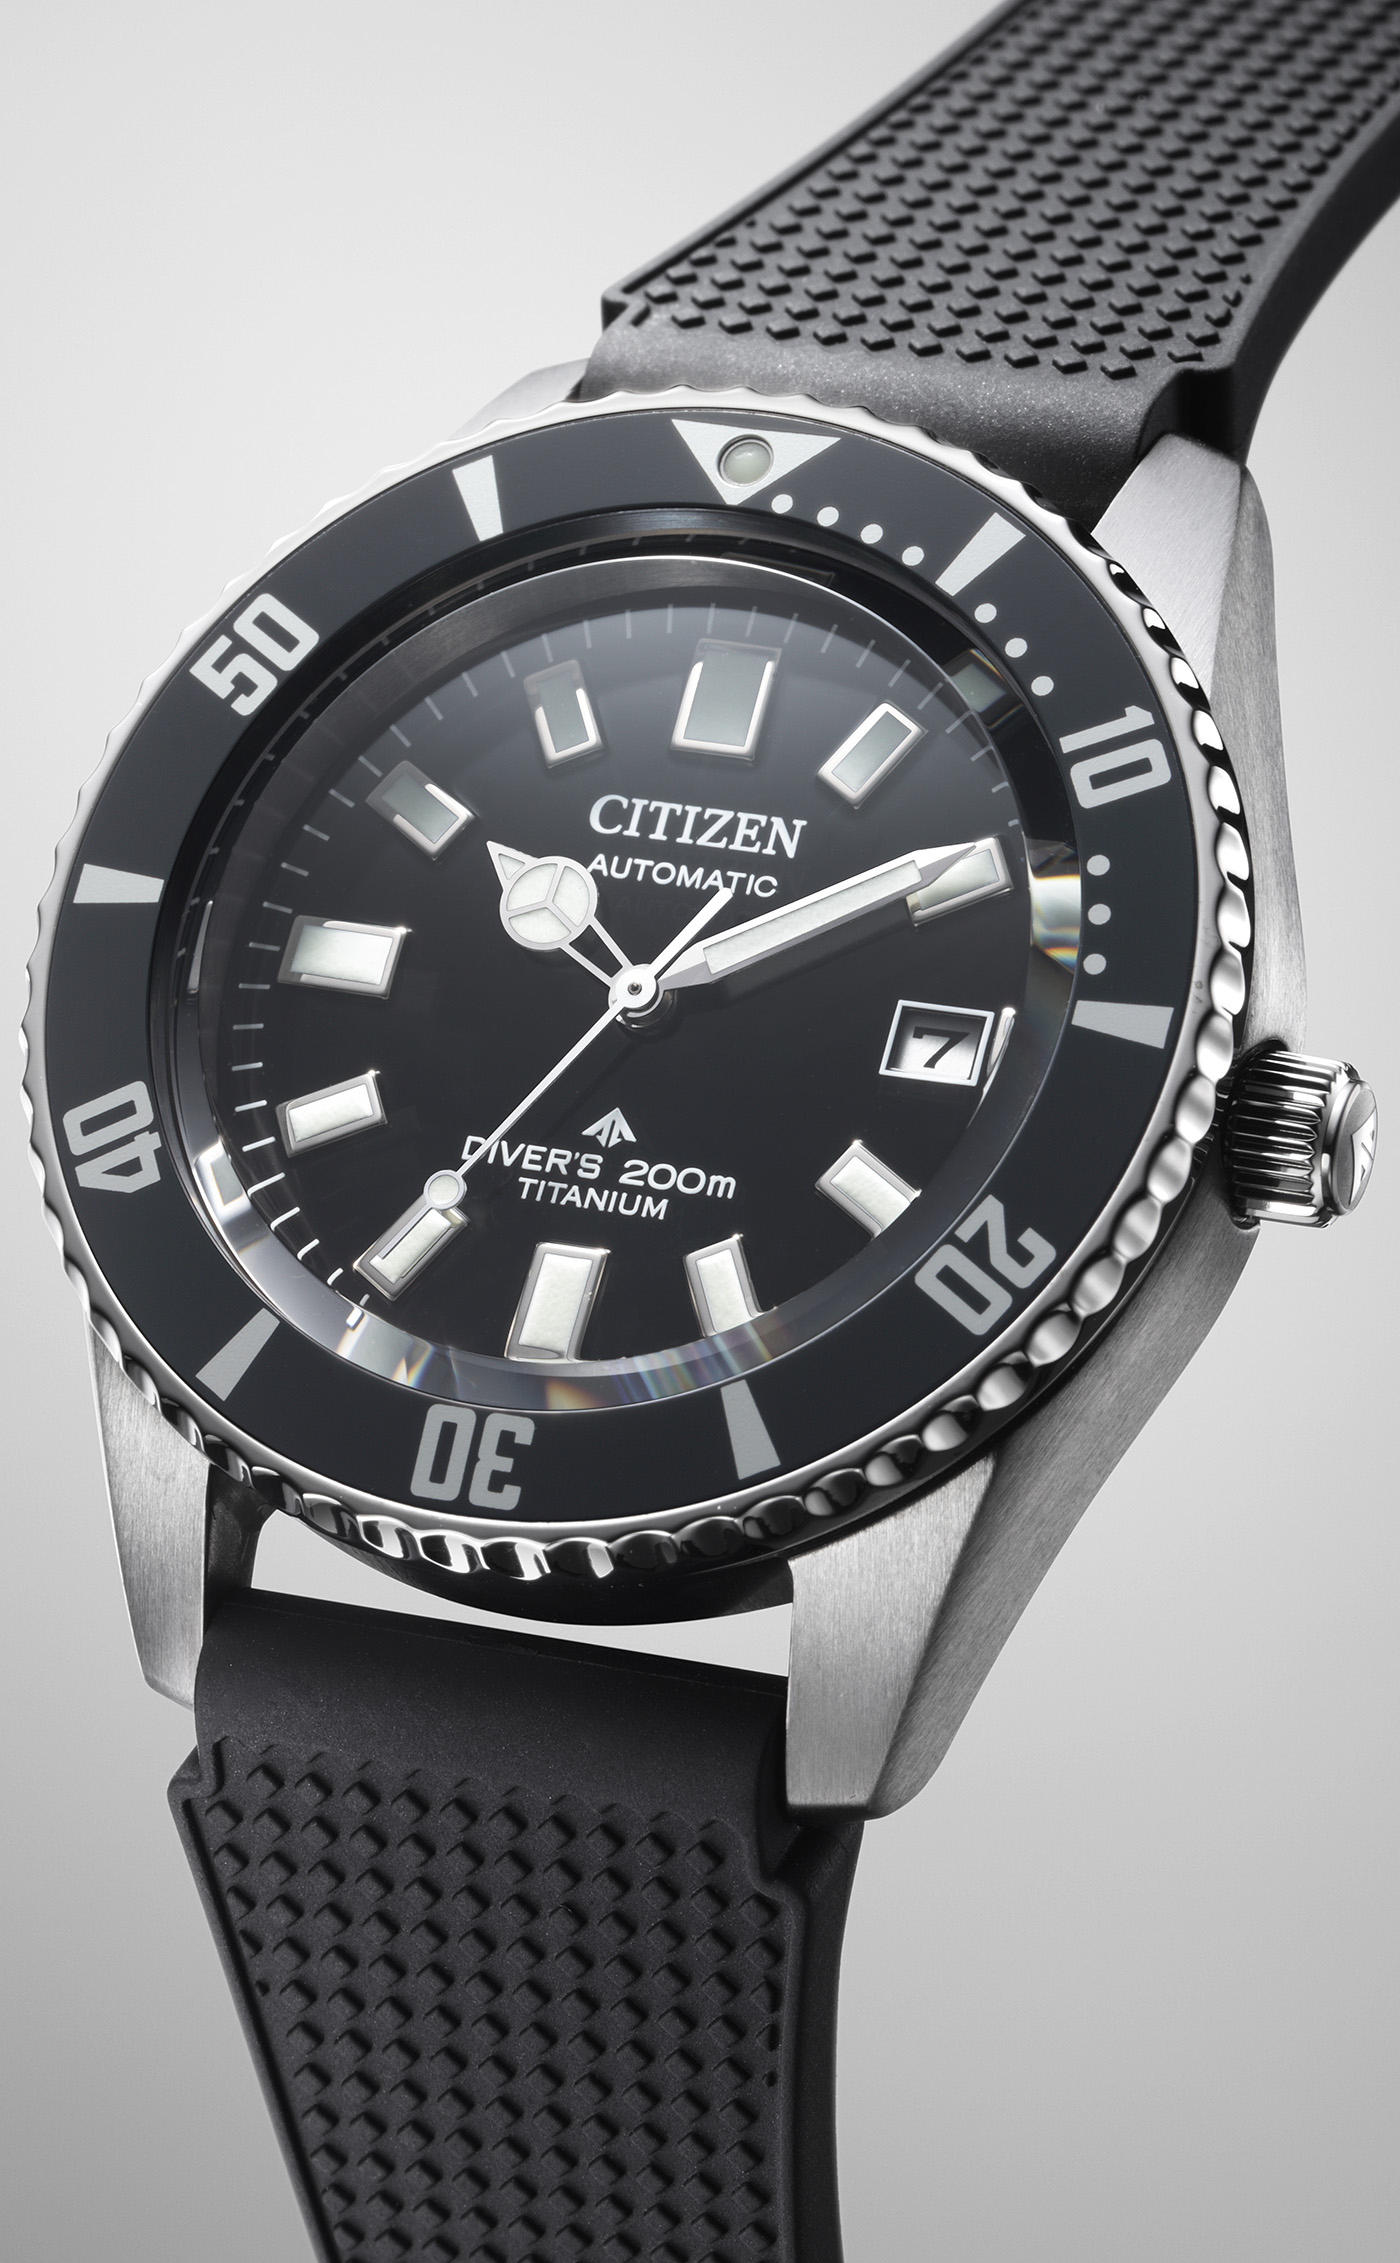 Explore Enduring Dive Watch Style With The Citizen Promaster Mechanical  Diver 200m | aBlogtoWatch